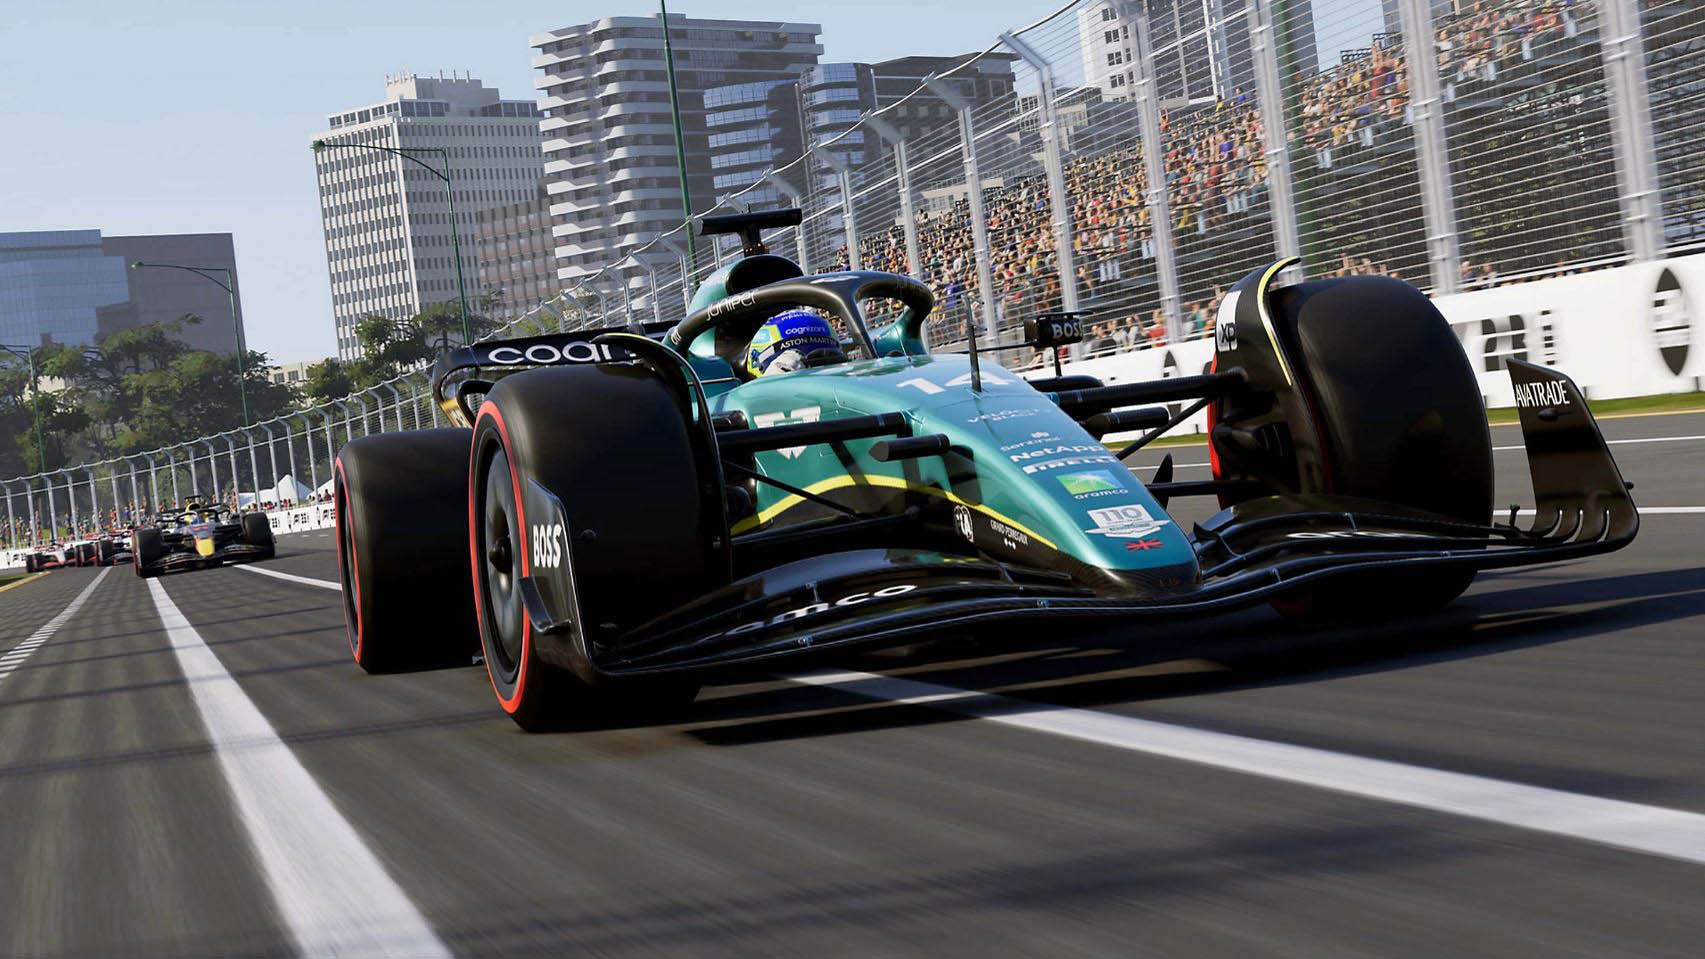 EA Sports F1 23 Review (PS5)